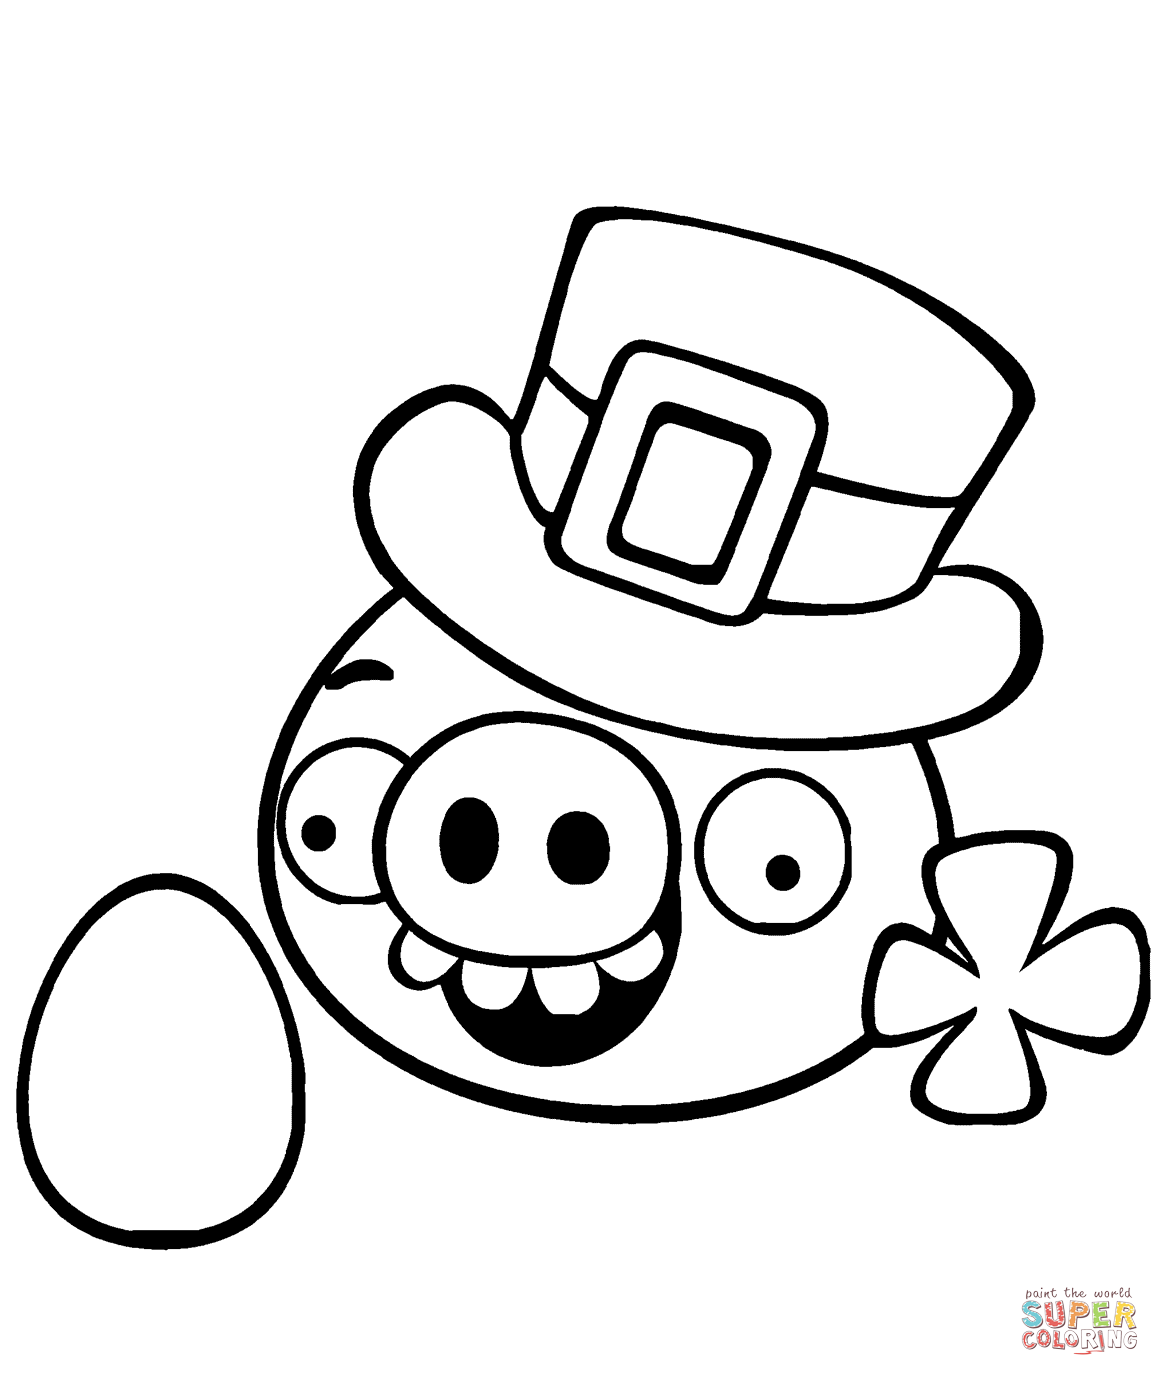 Minion pig dressed as a leprechaun coloring page free printable coloring pages